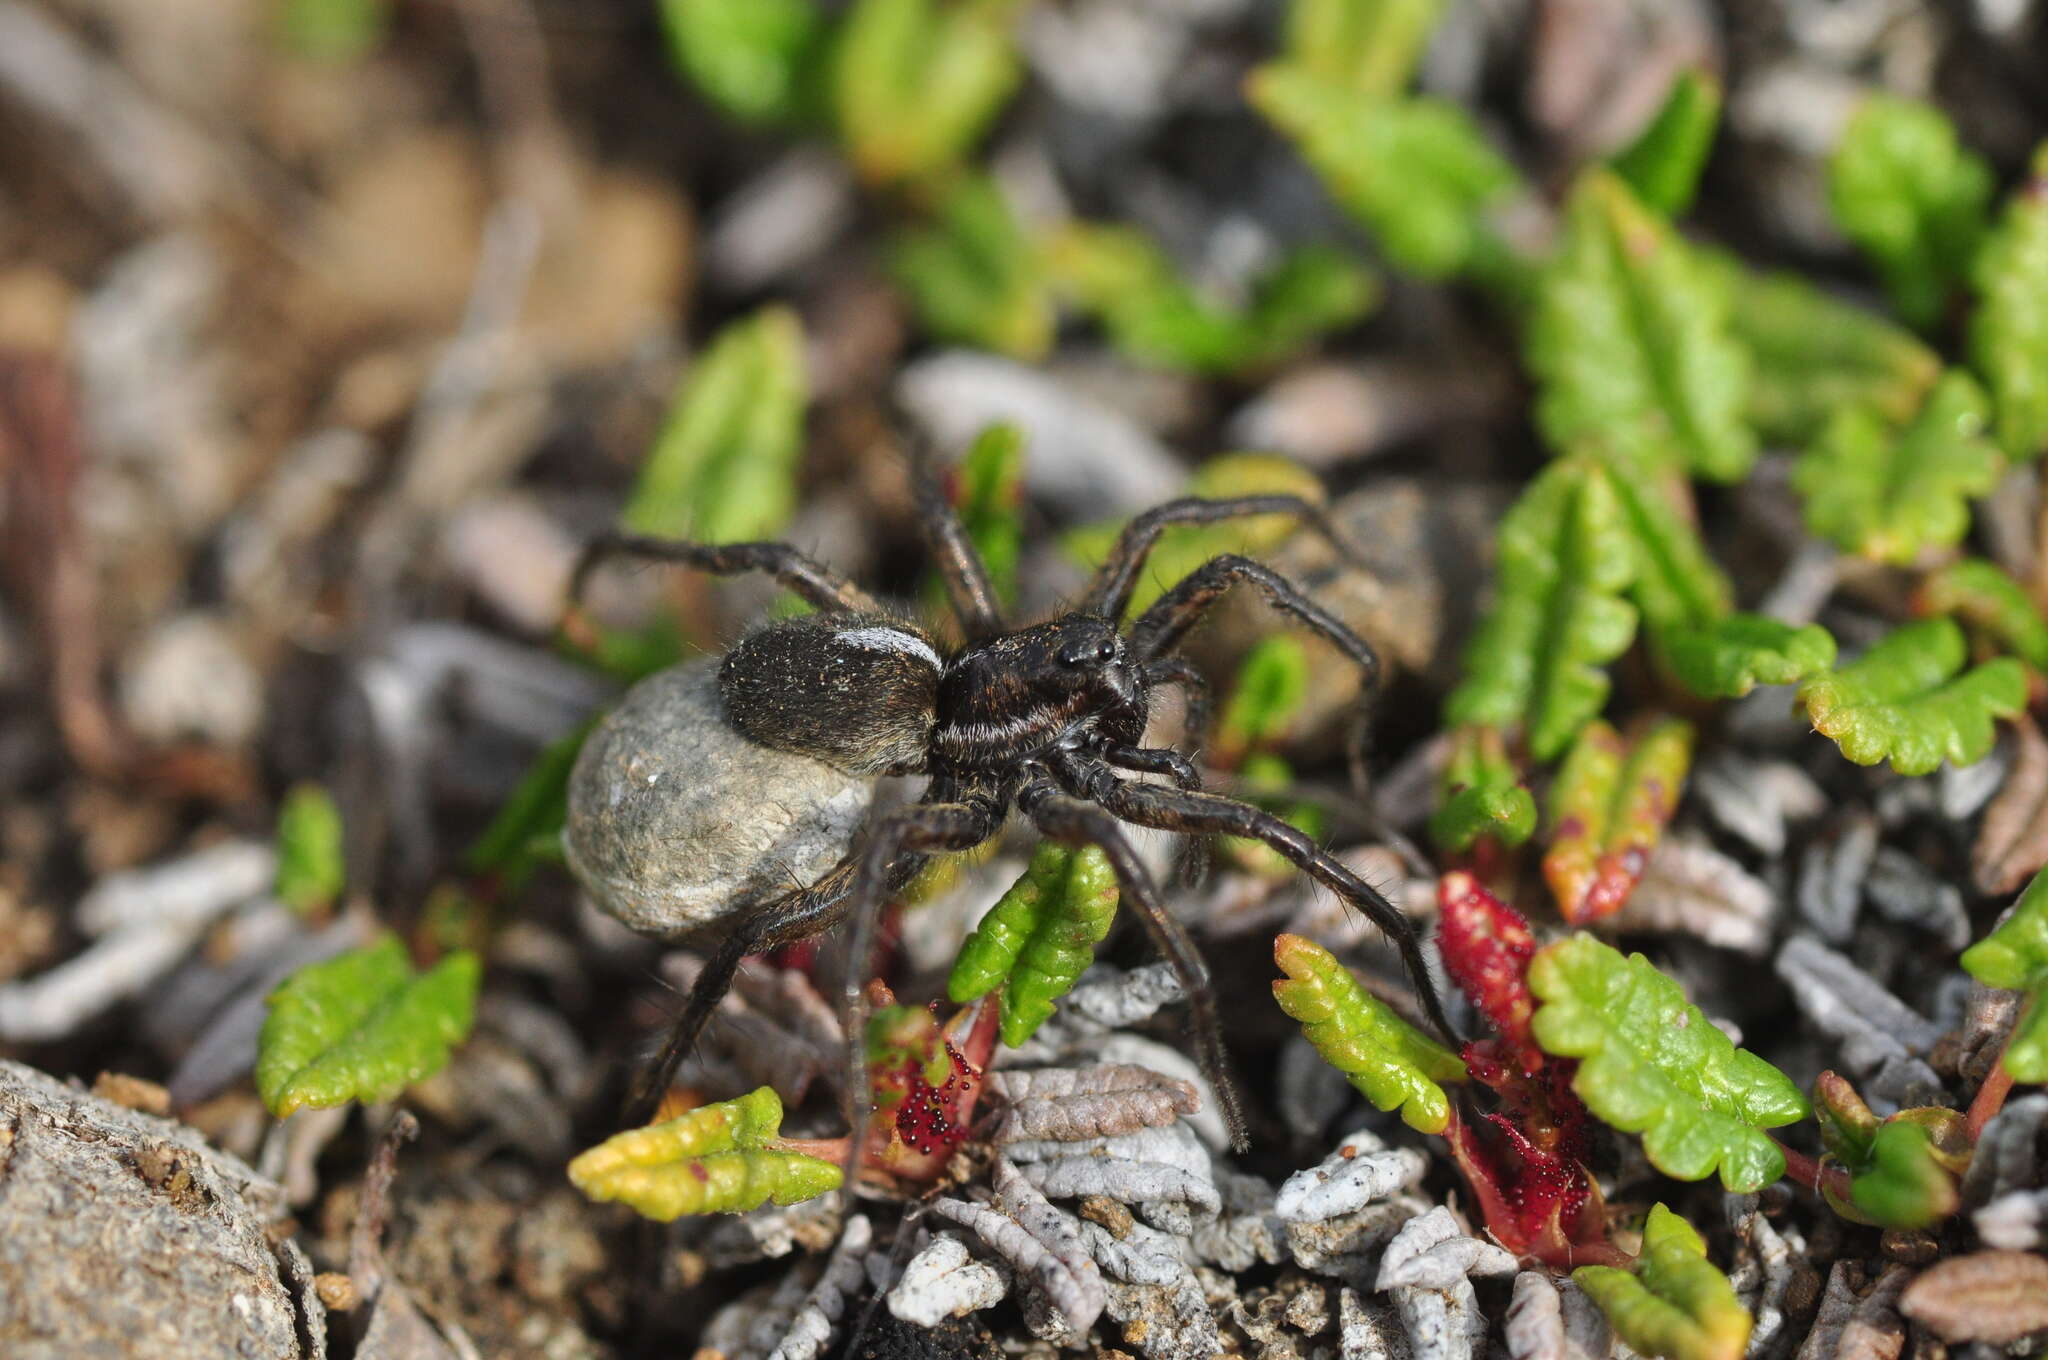 Image of Arctic wolf spider